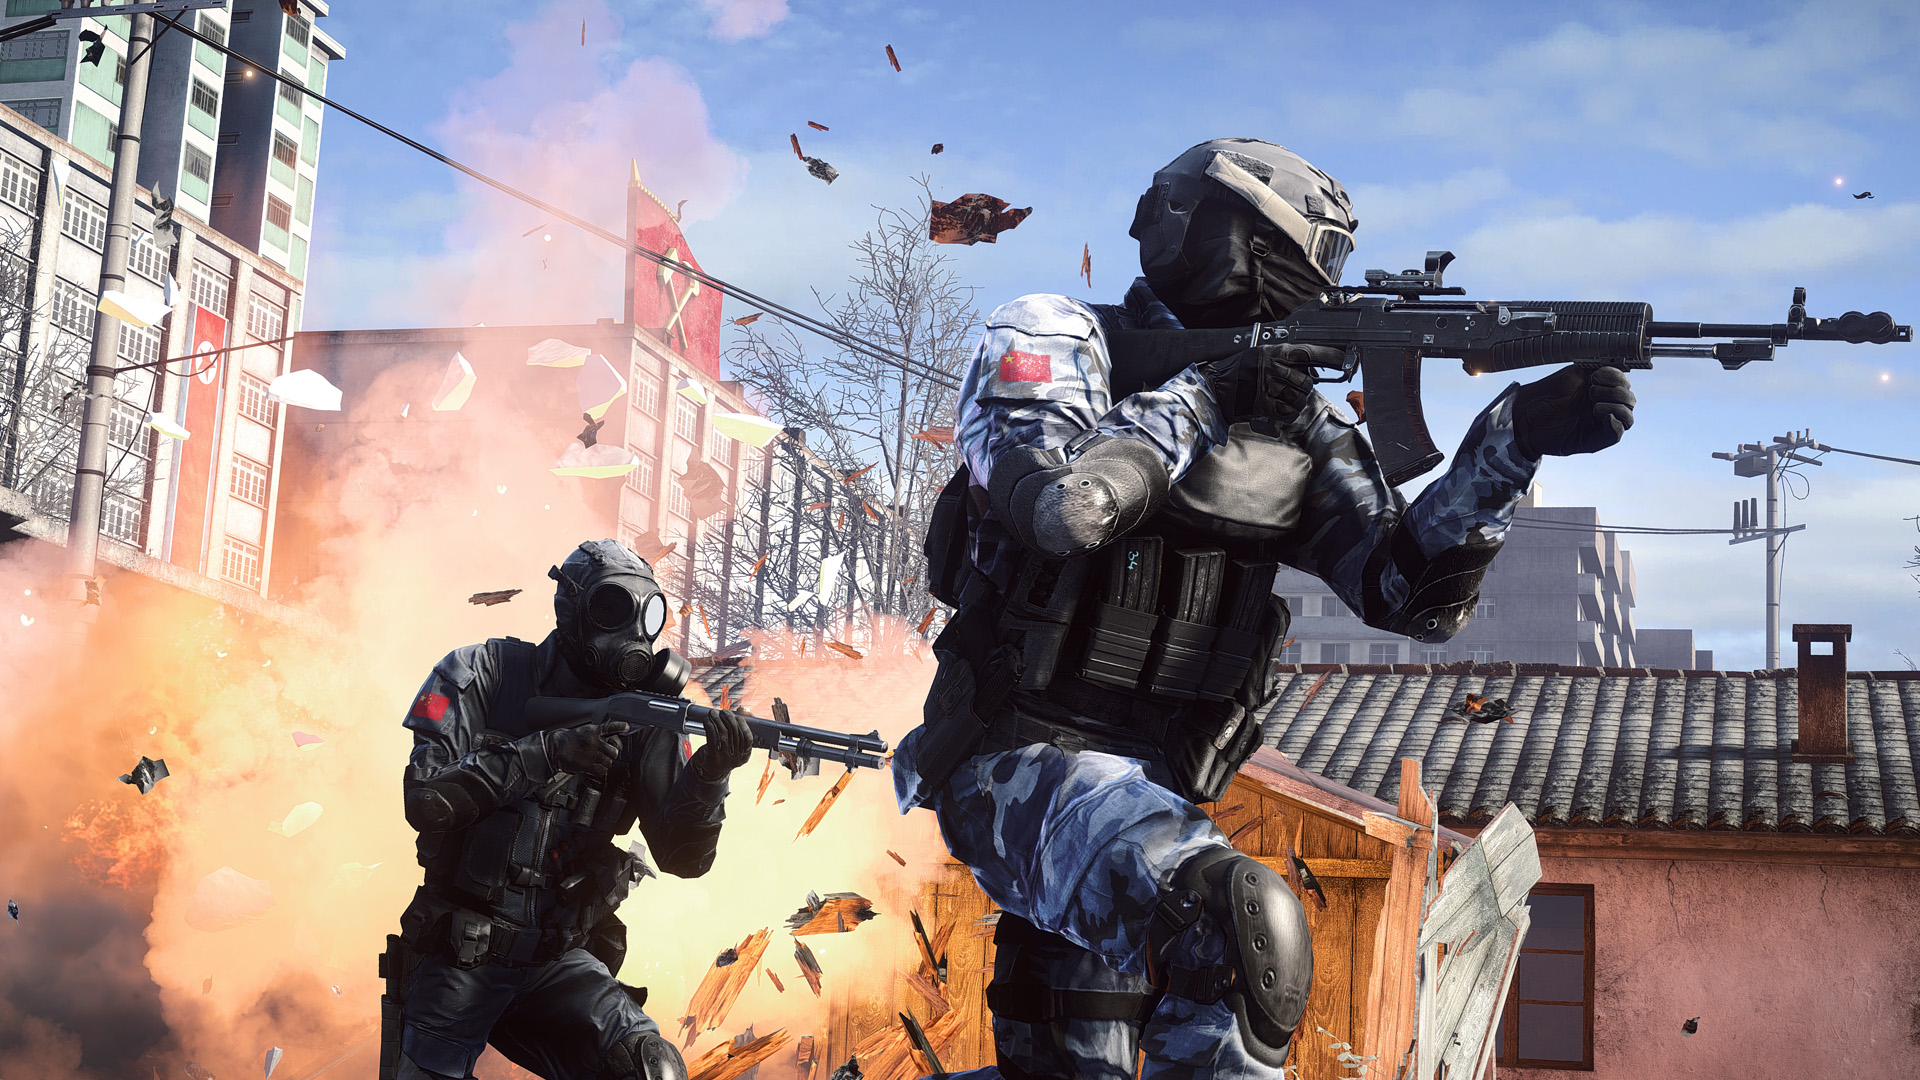 Download Now Battlefield 4 Spring Patch, Check Out the Huge Changelog